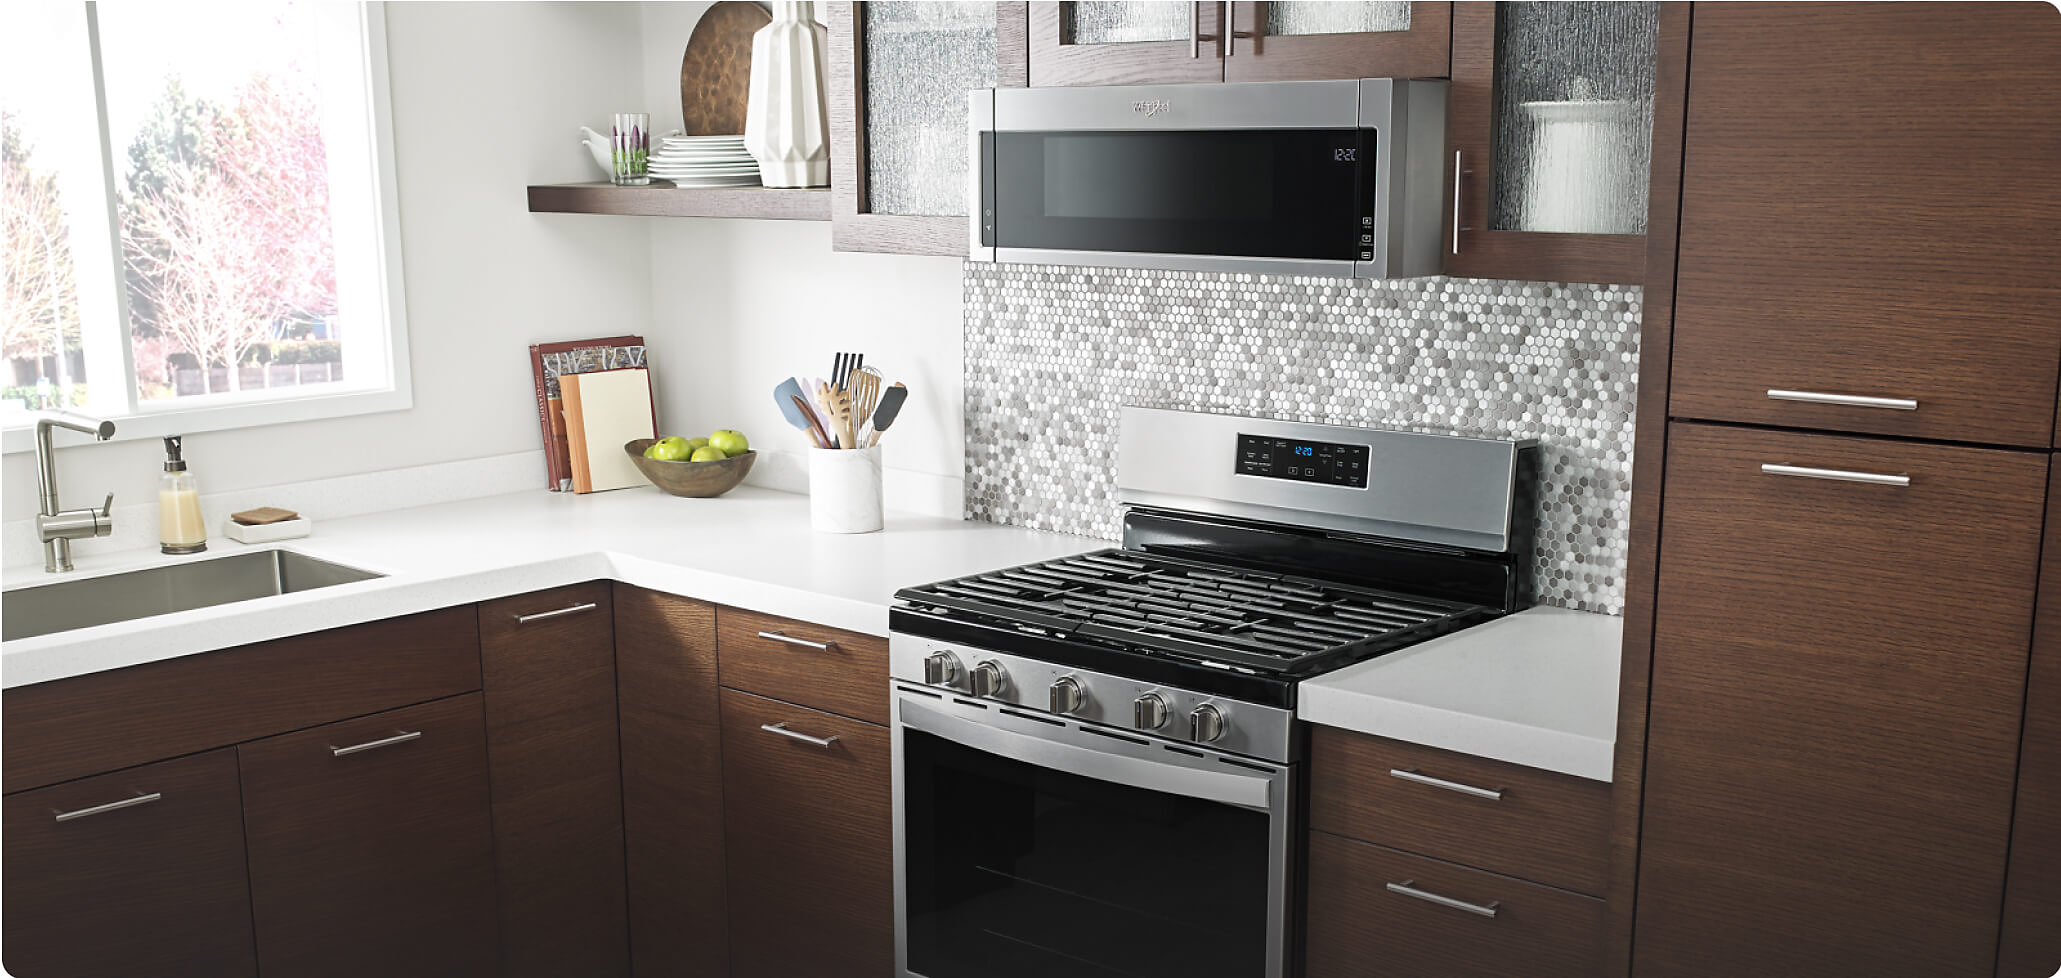 Whirlpool® Freestanding Gas Range and Low Profile Microwave Hood Combination in a kitchen with brown cabinets